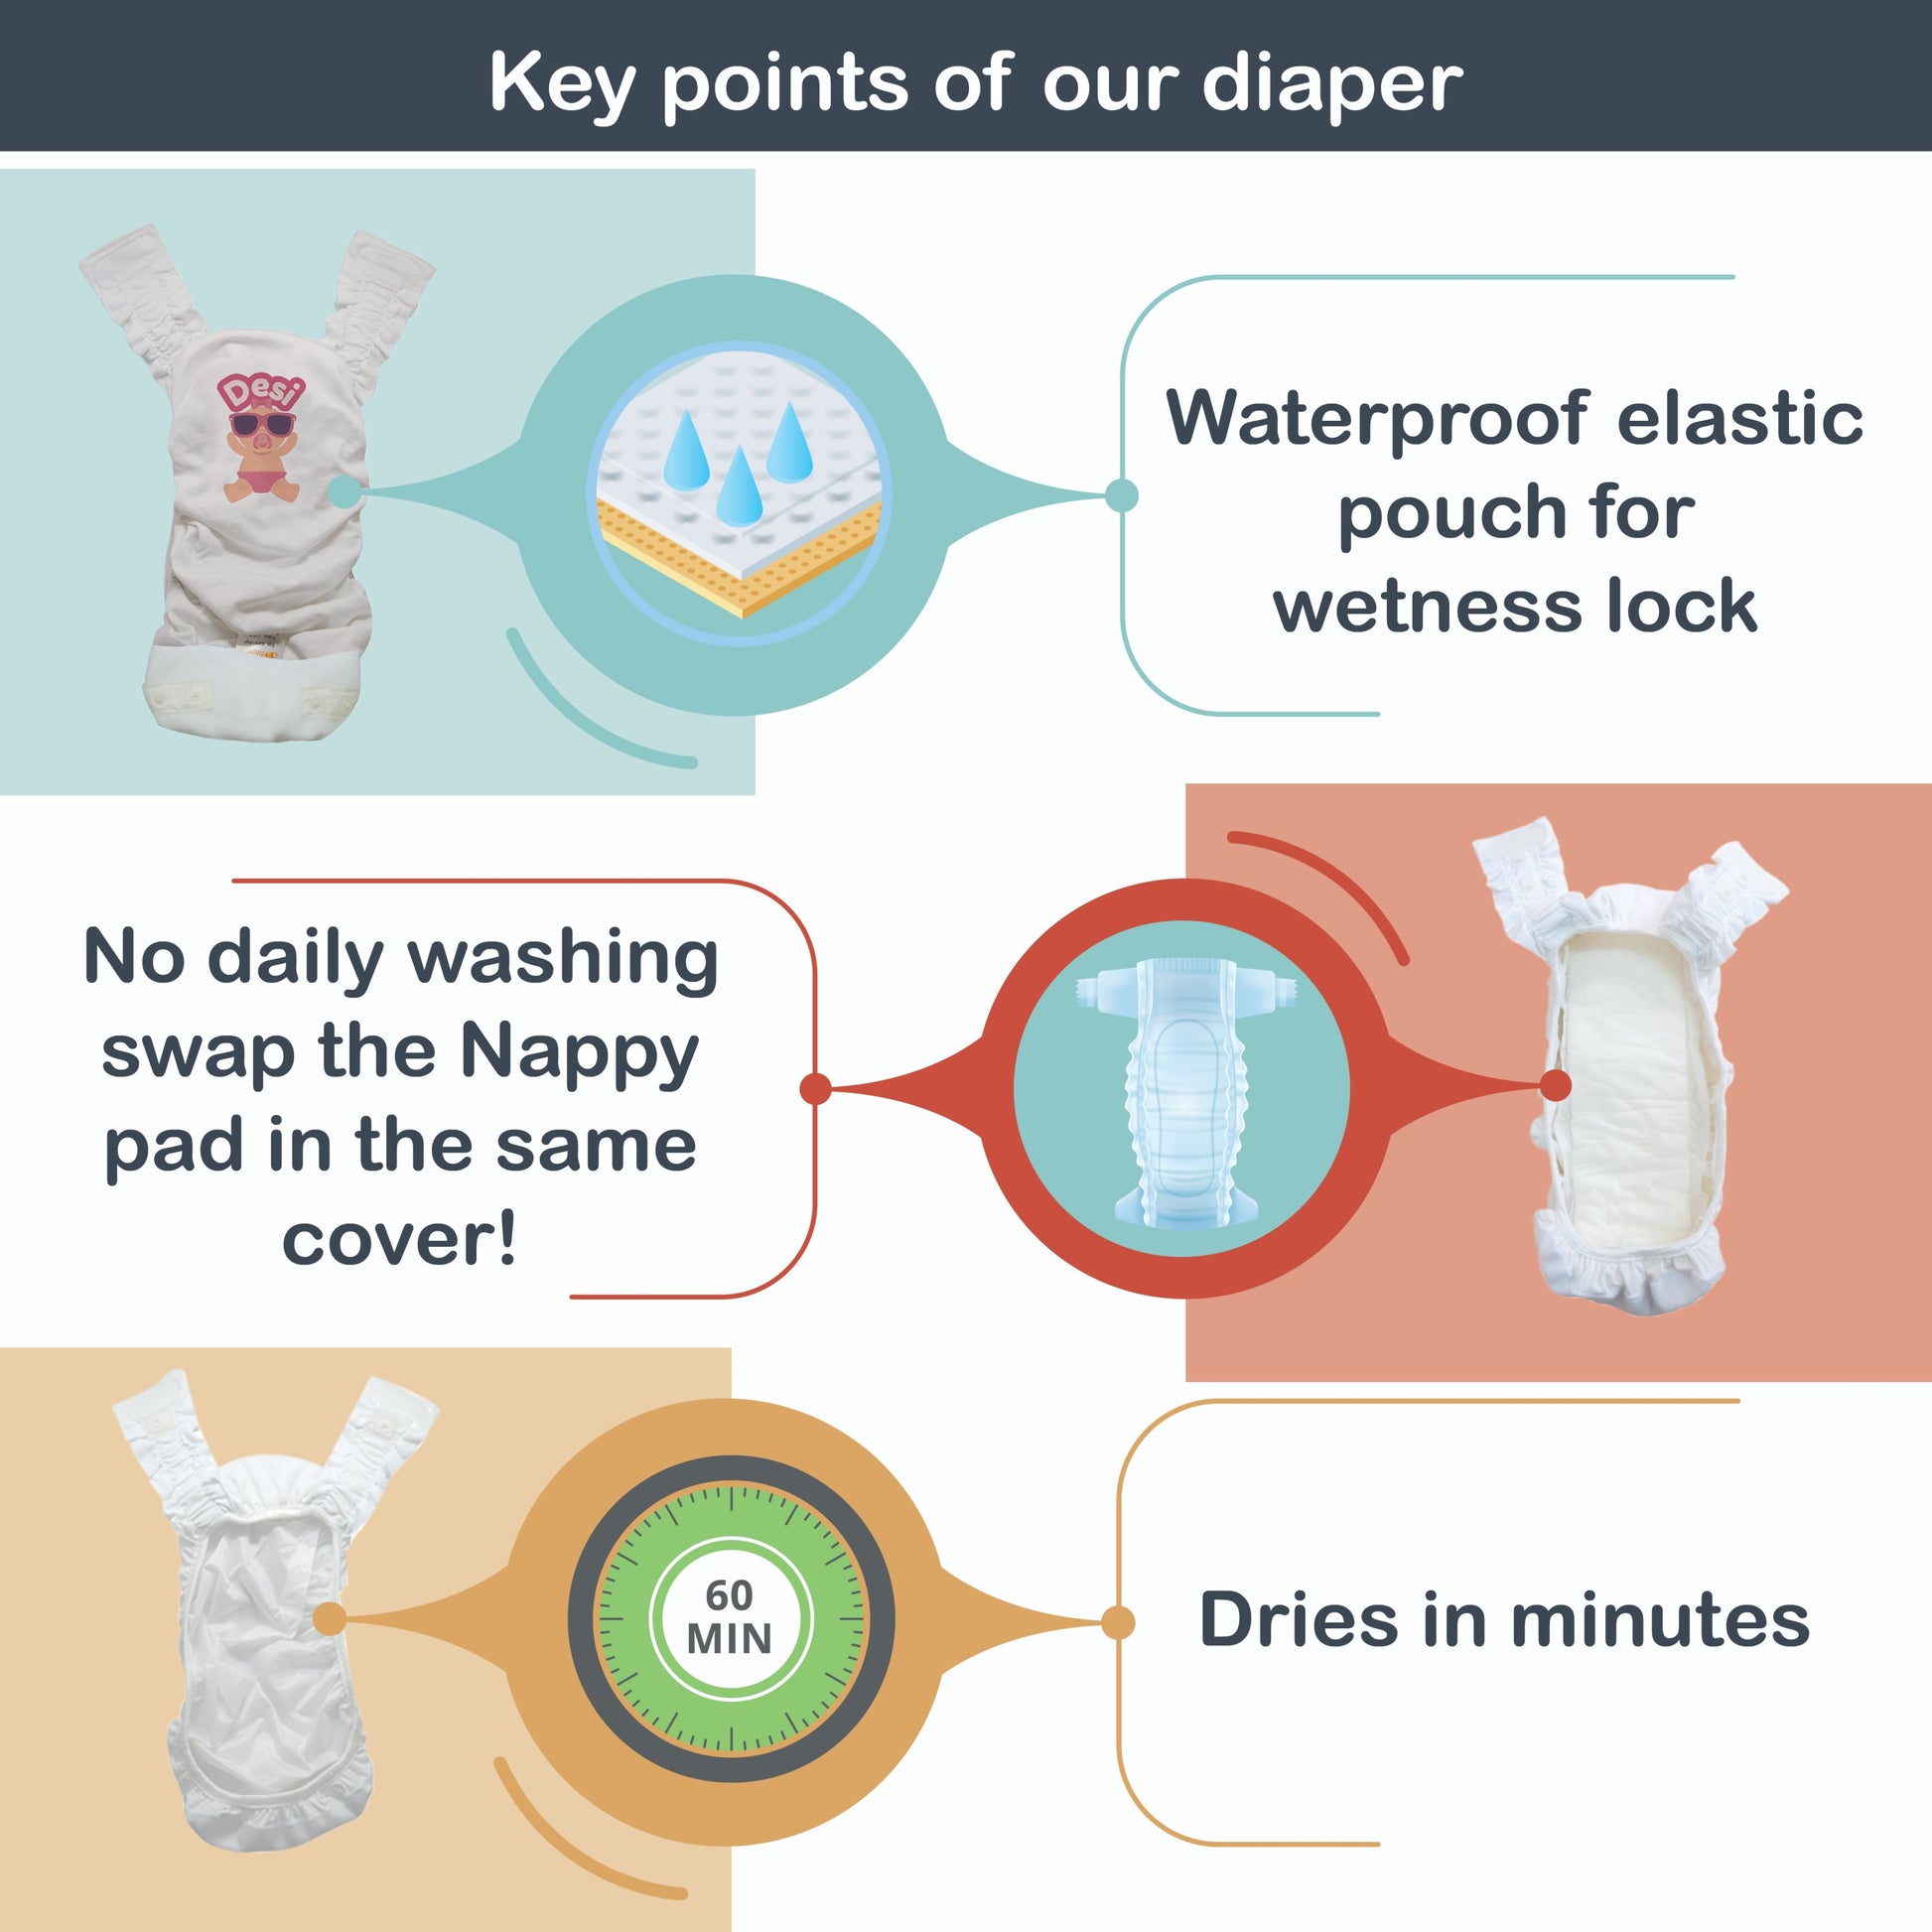 This image includes our diaper's keypoints: 1. Water proof elastic pouch for wetness lock -this text is aligning with our cloth diaper's outer view enlarged image. 2. No daily washing! swap the nappy pad in the same cover - this text is aligning next to our nappy pad inserted inside our cloth diaper 3. Dries in minutes - this text is aligning with our cloth diaper inner view image.